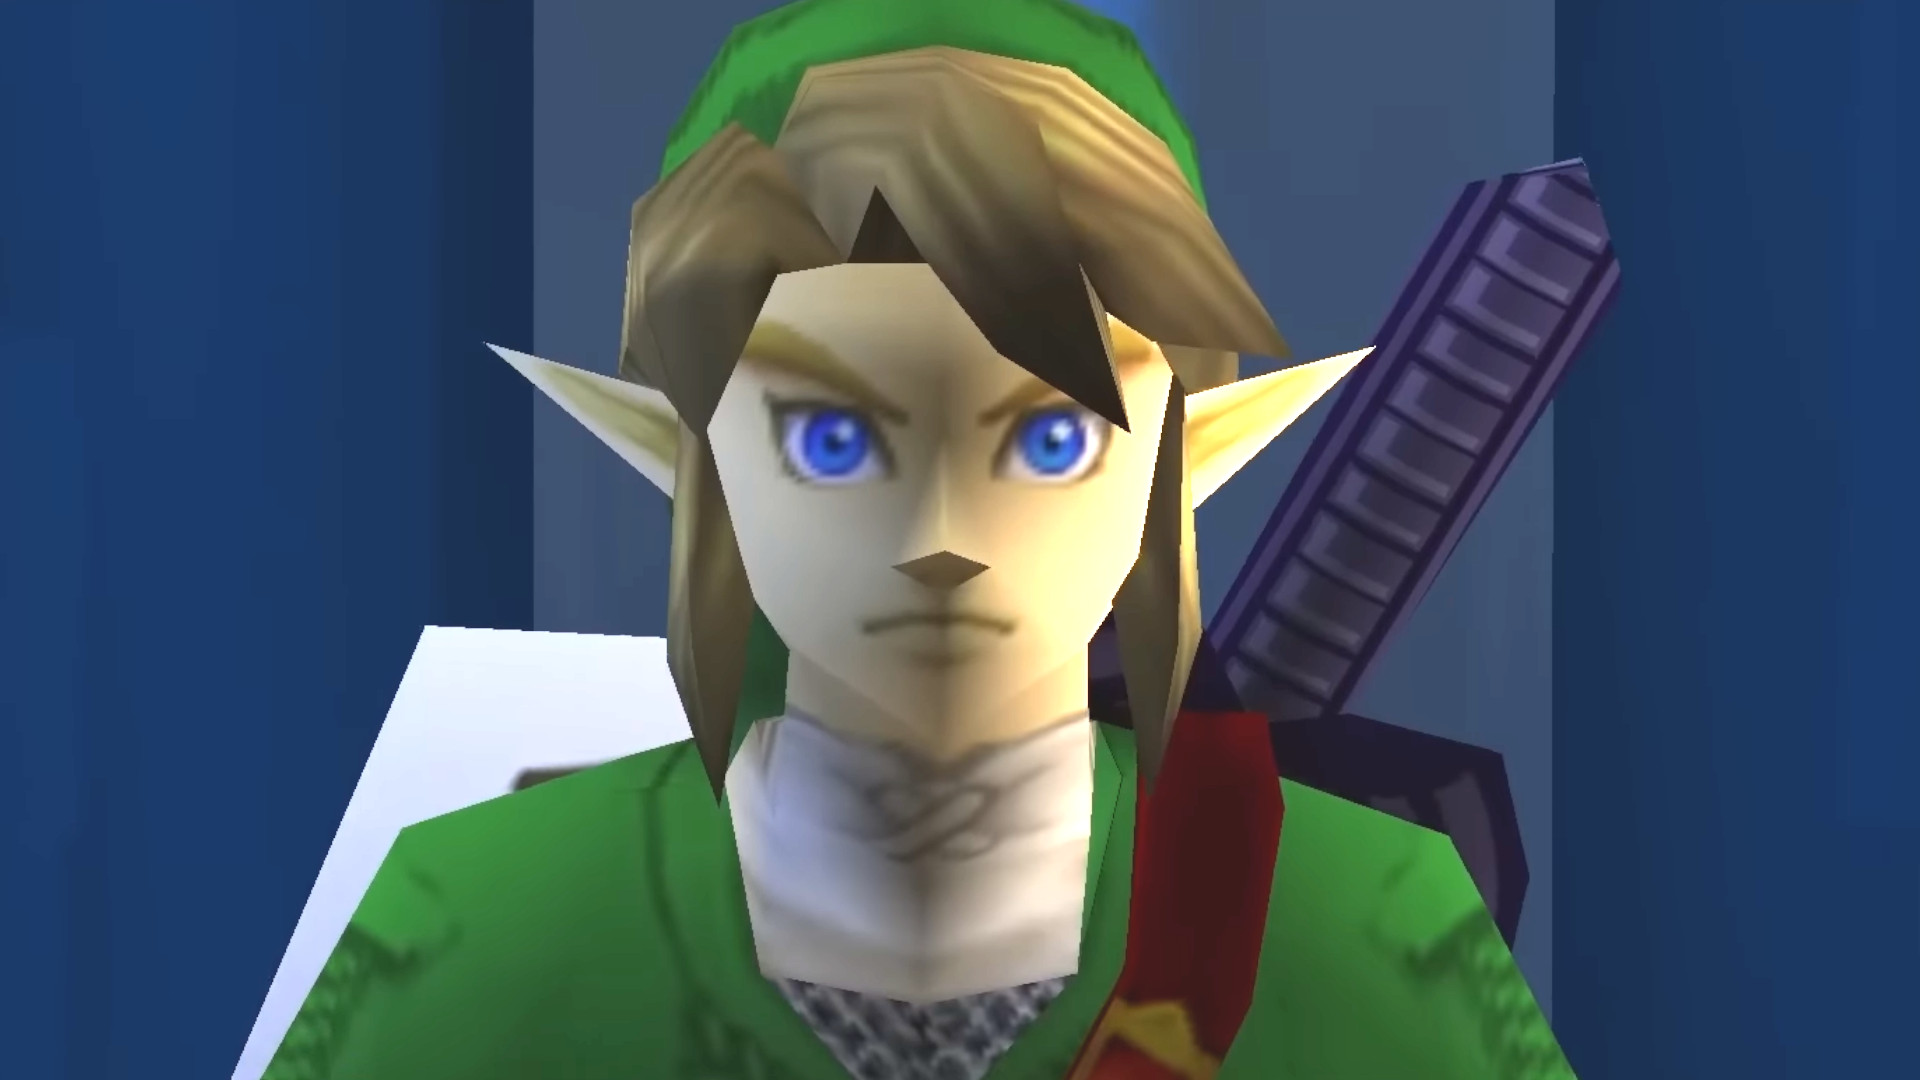 The Legend of Zelda: Ocarina of Time fan-made PC port is now